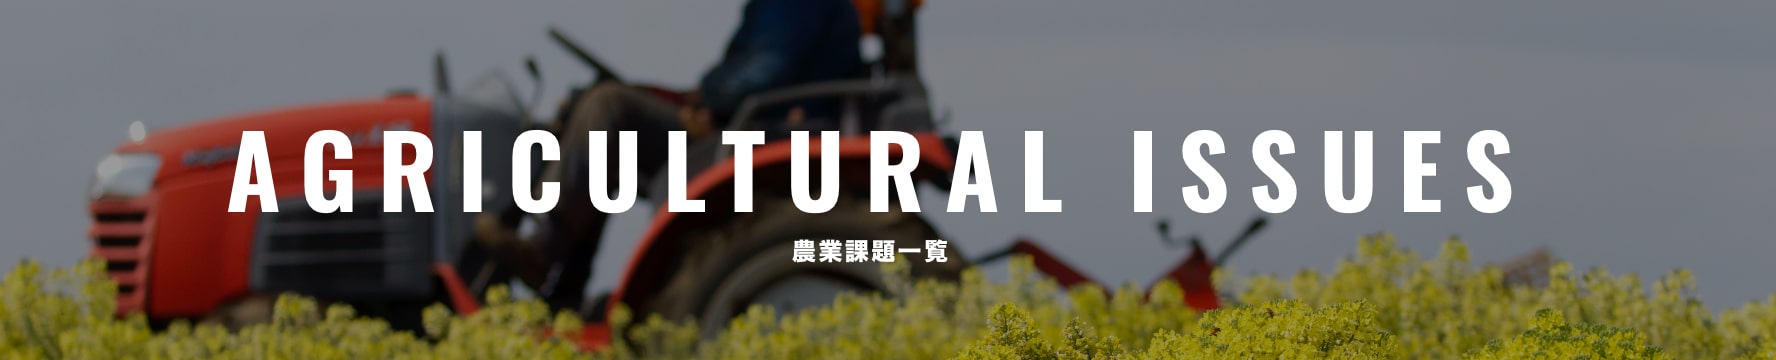 AGRICULTURAL ISSUES 農業課題一覧